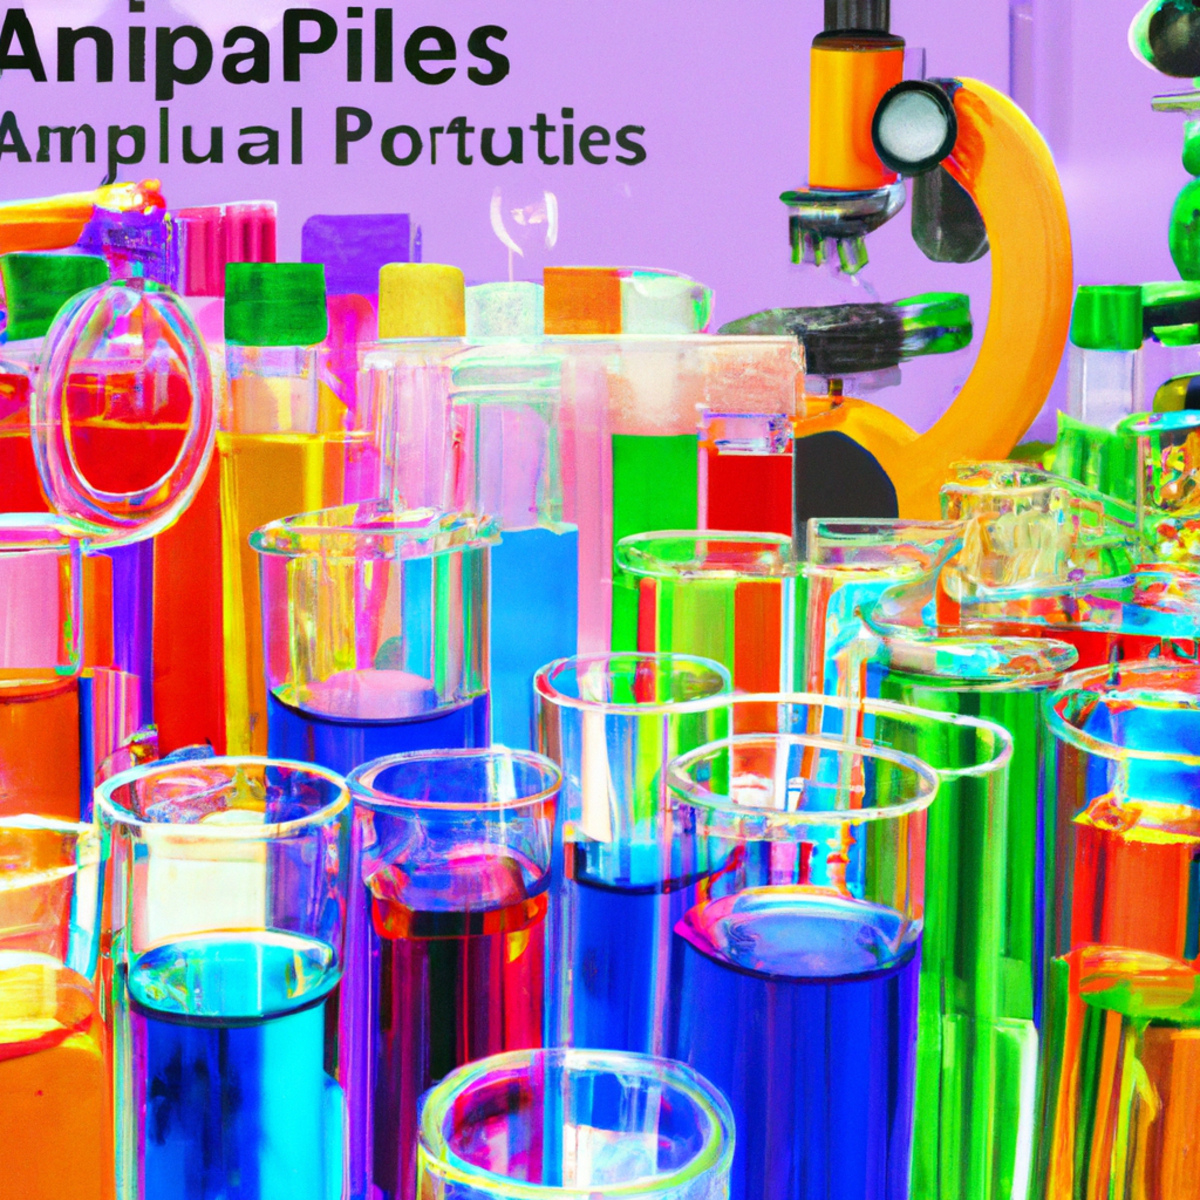 Close-up view of a meticulously arranged laboratory with colorful test tubes, microscopes, and scientific equipment. Symbolizes research on Alpha-1 Antitrypsin Deficiency.